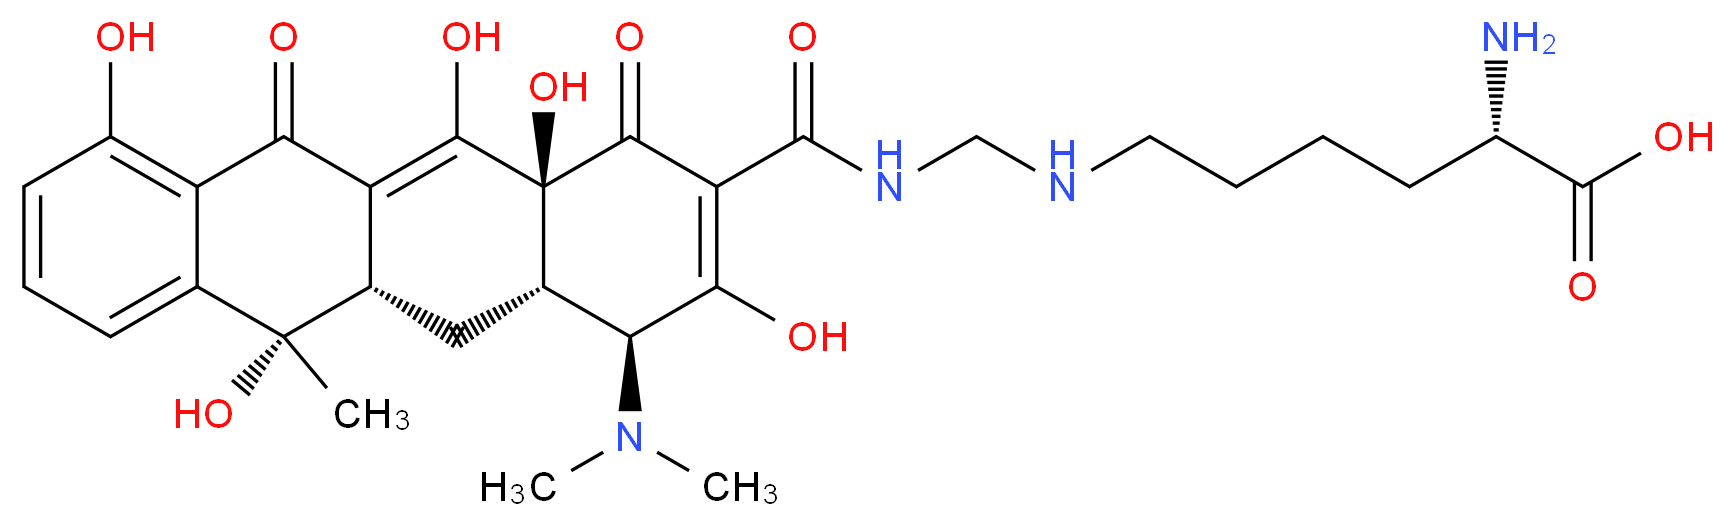 chemical structure of lymecycline